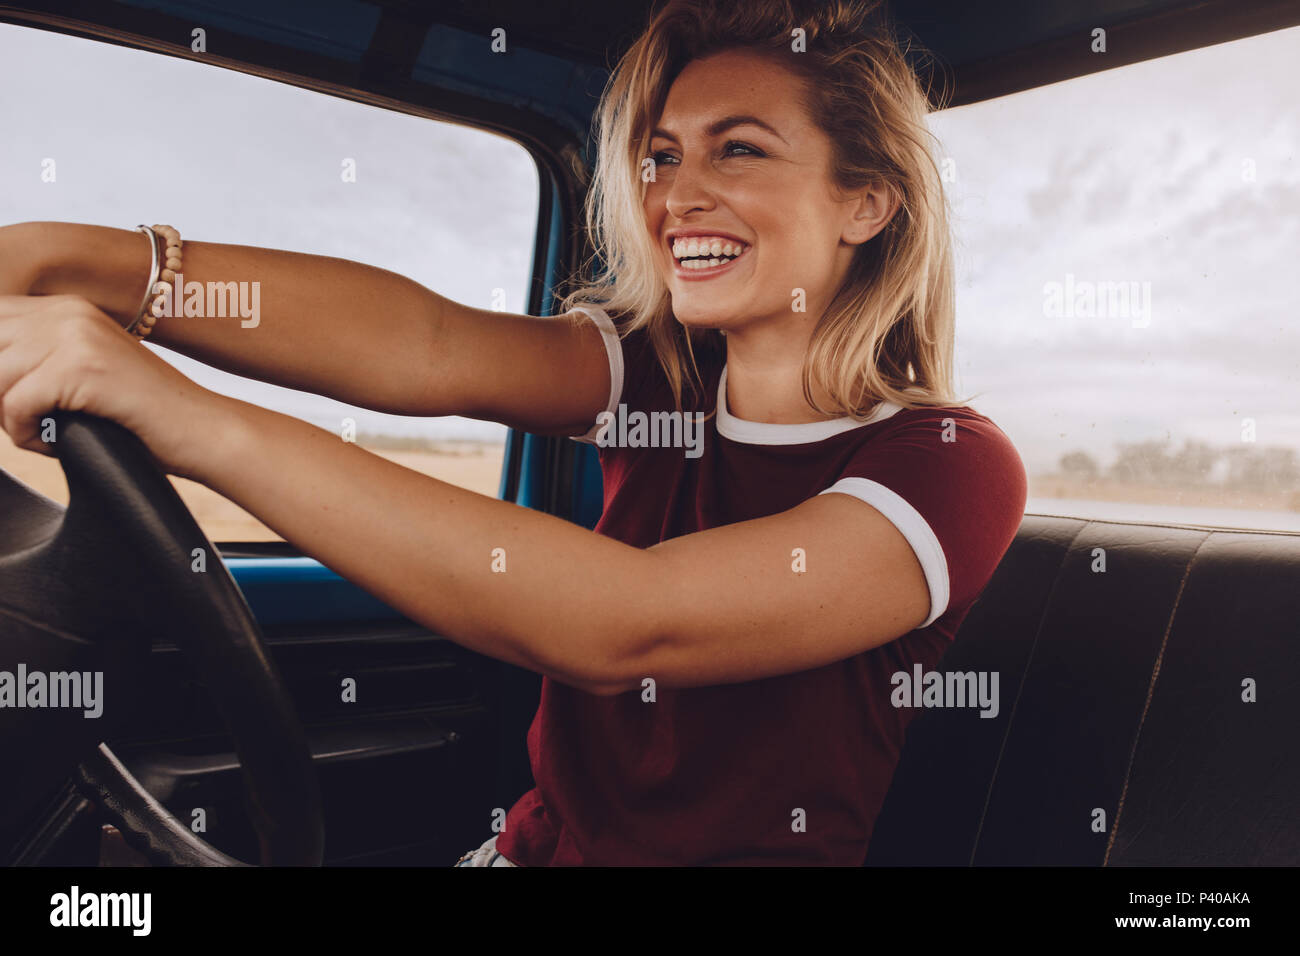 Smiling woman enjoying driving a car. Cheerful female going on a road trip by a old truck. Stock Photo